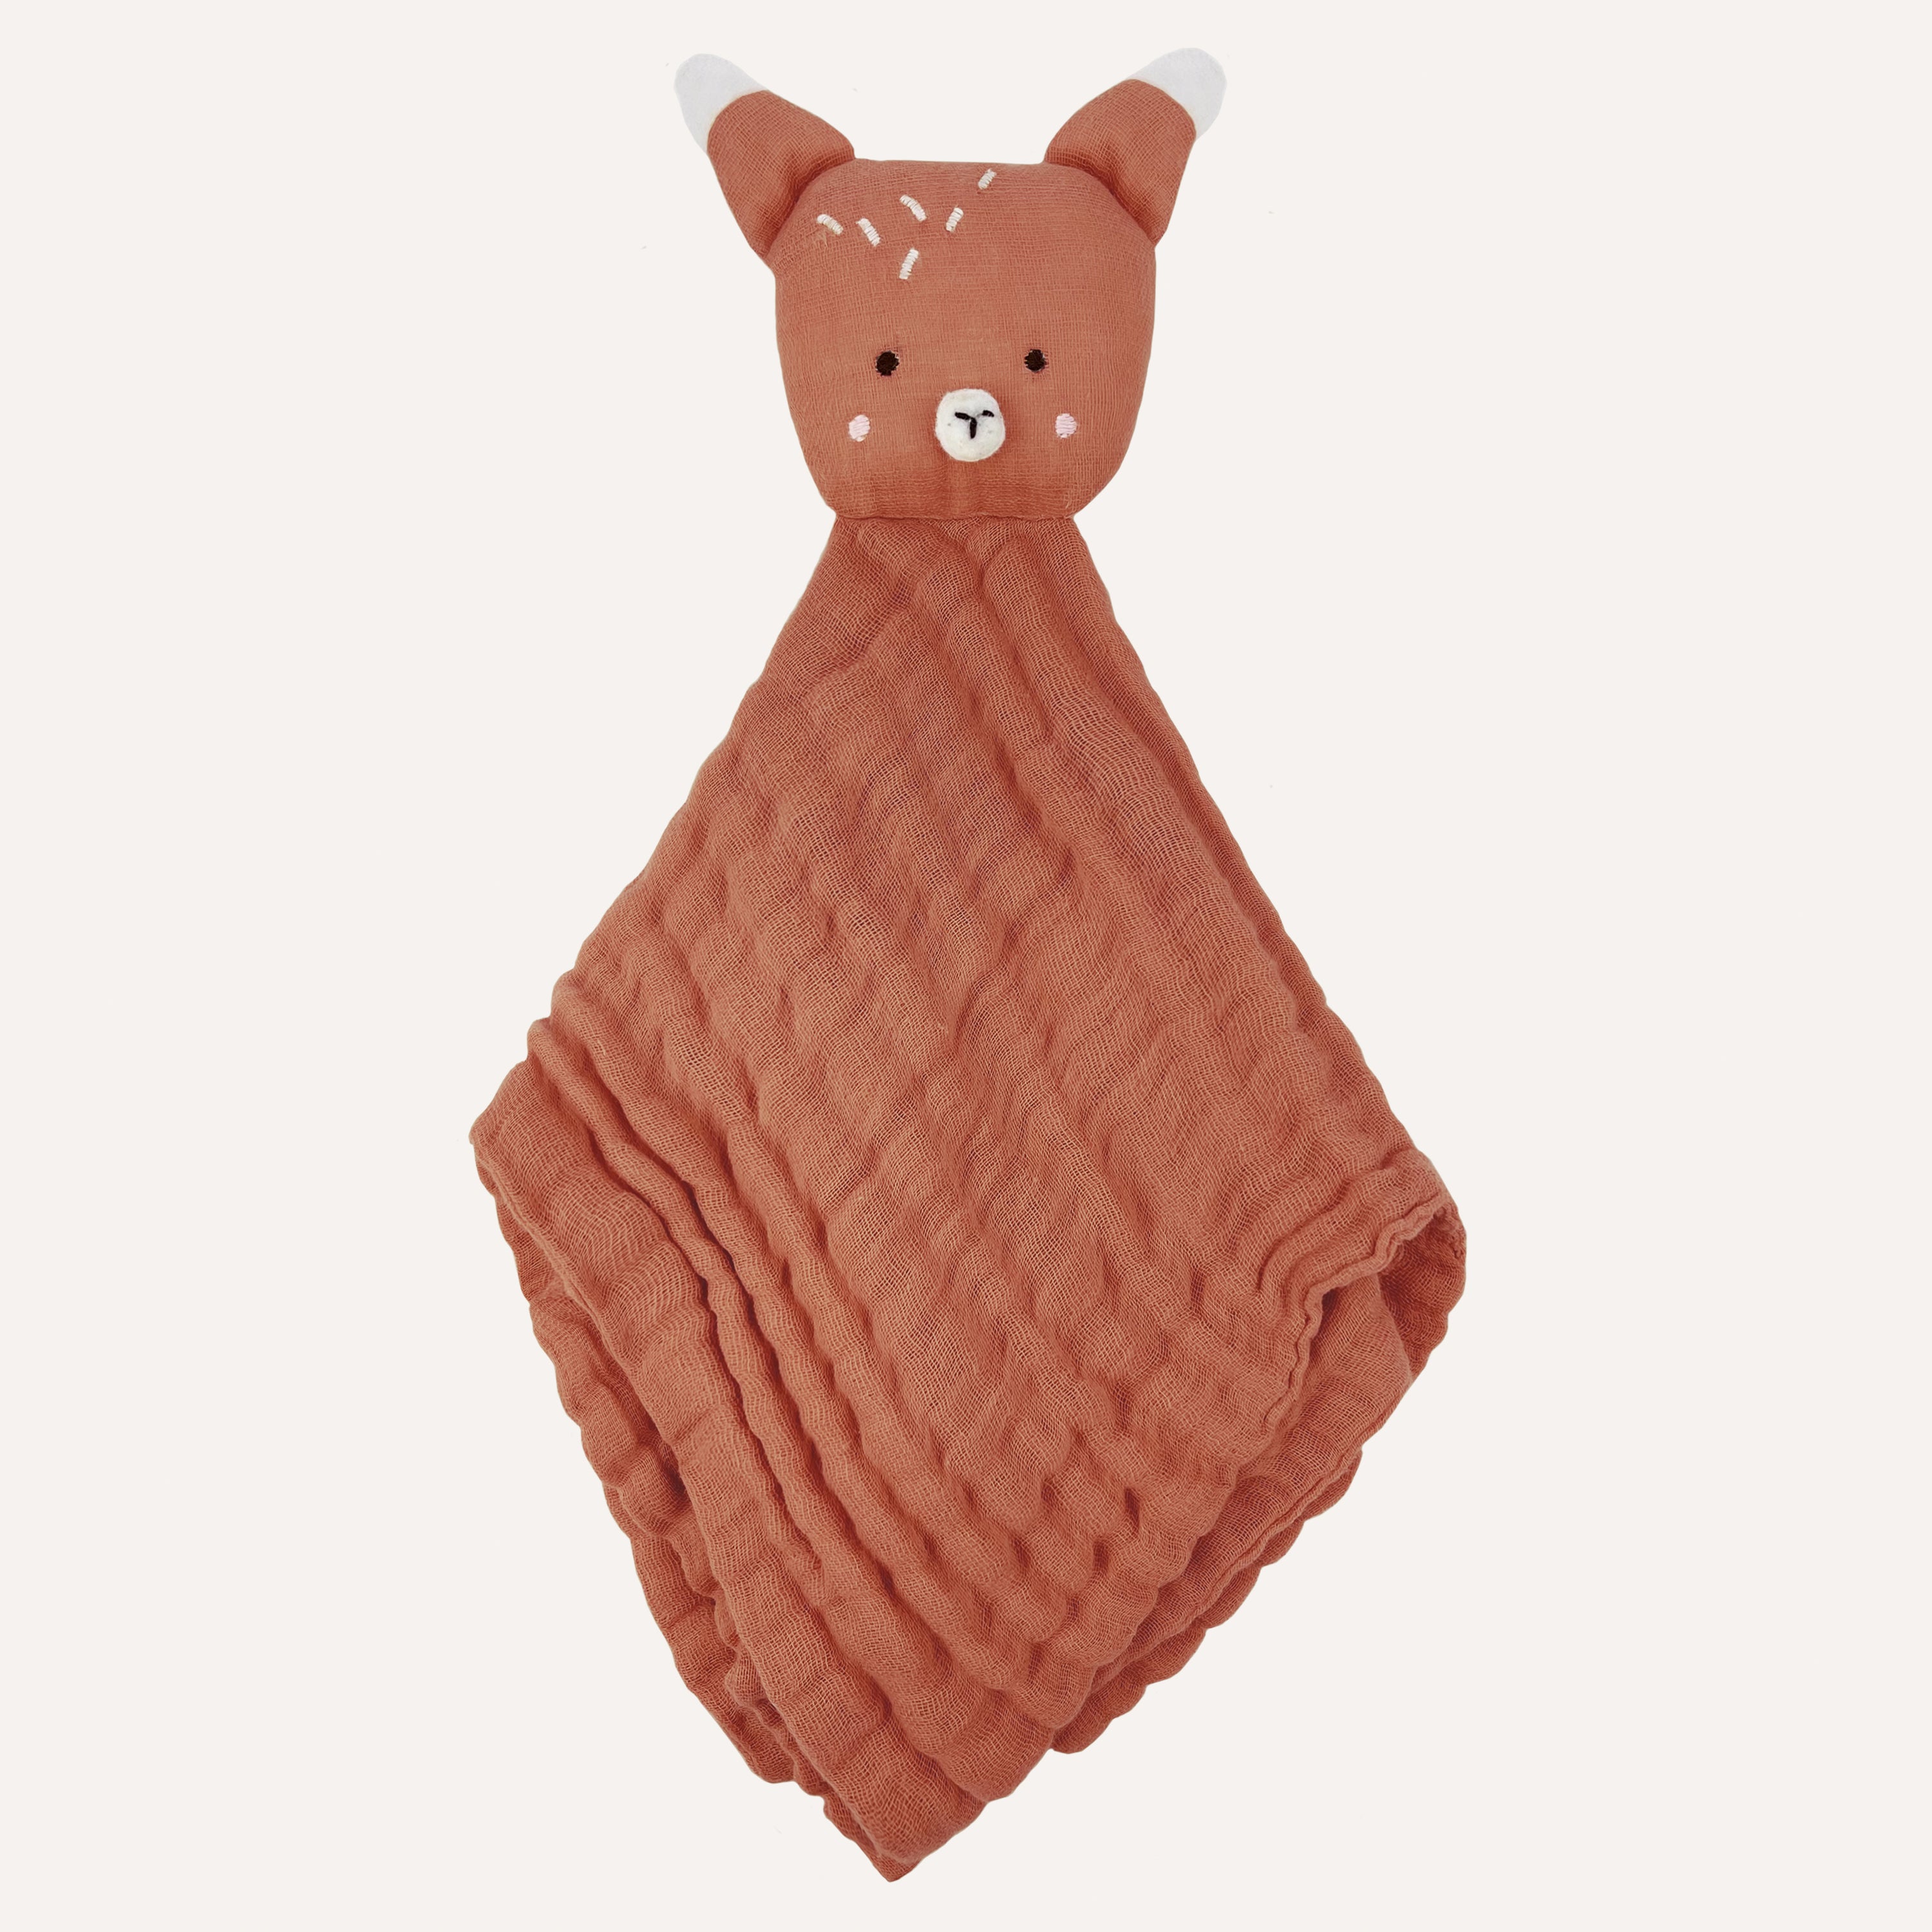 Abracadabra Organics Collectible Security Blanket With Cuddle Toy - Fox